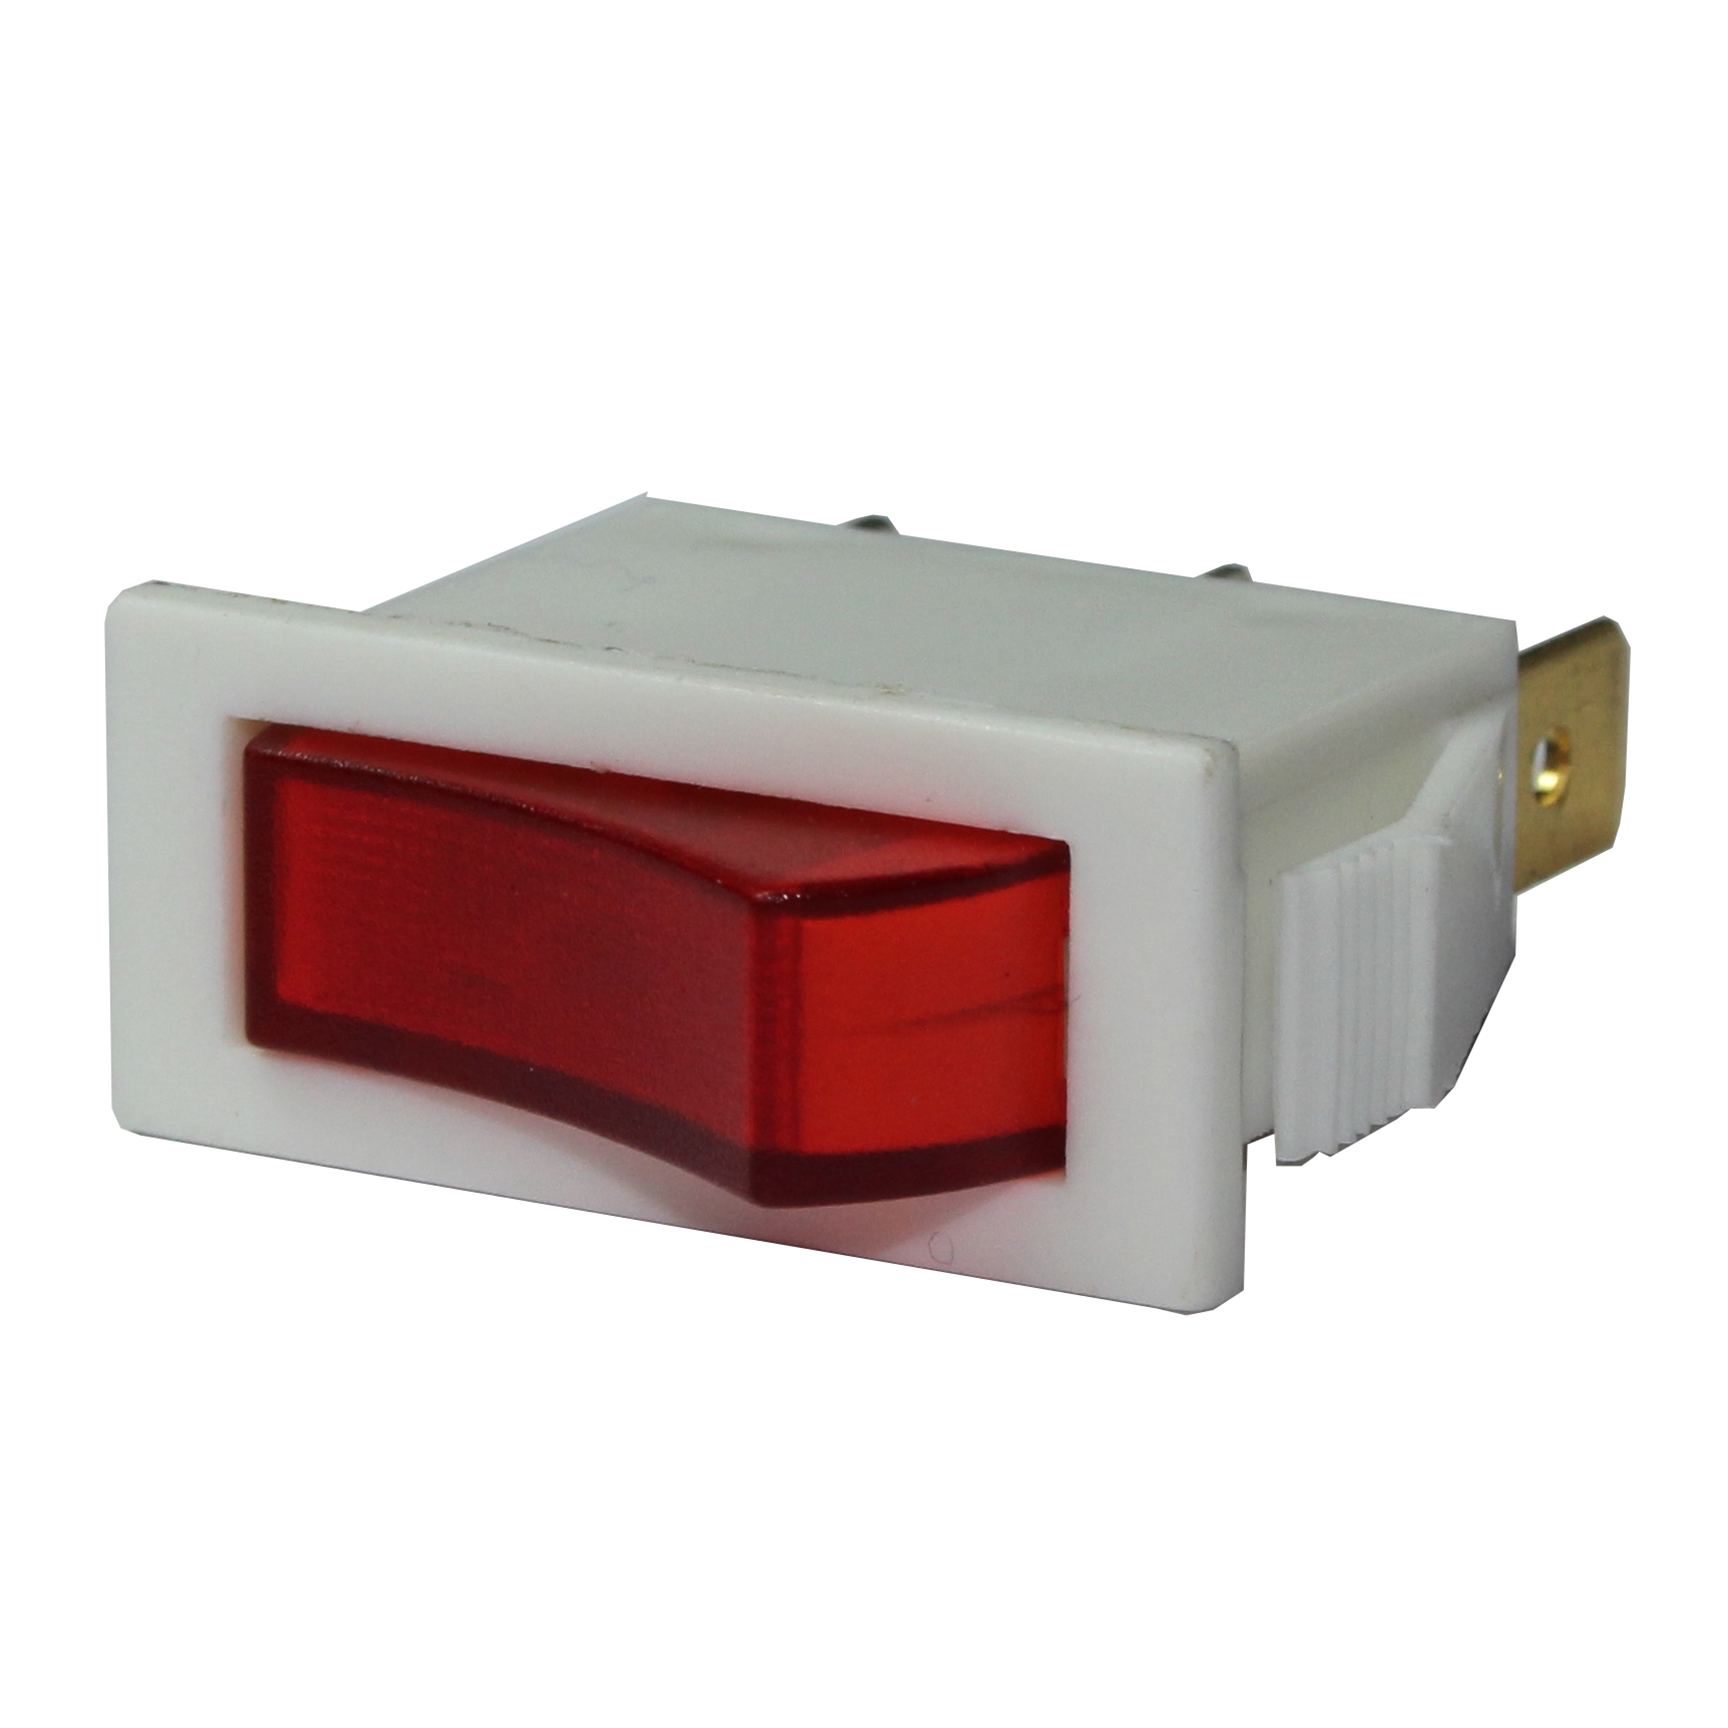 Athena On/Off Switch for AH-2238 Orbiting Processor - Online Sale!